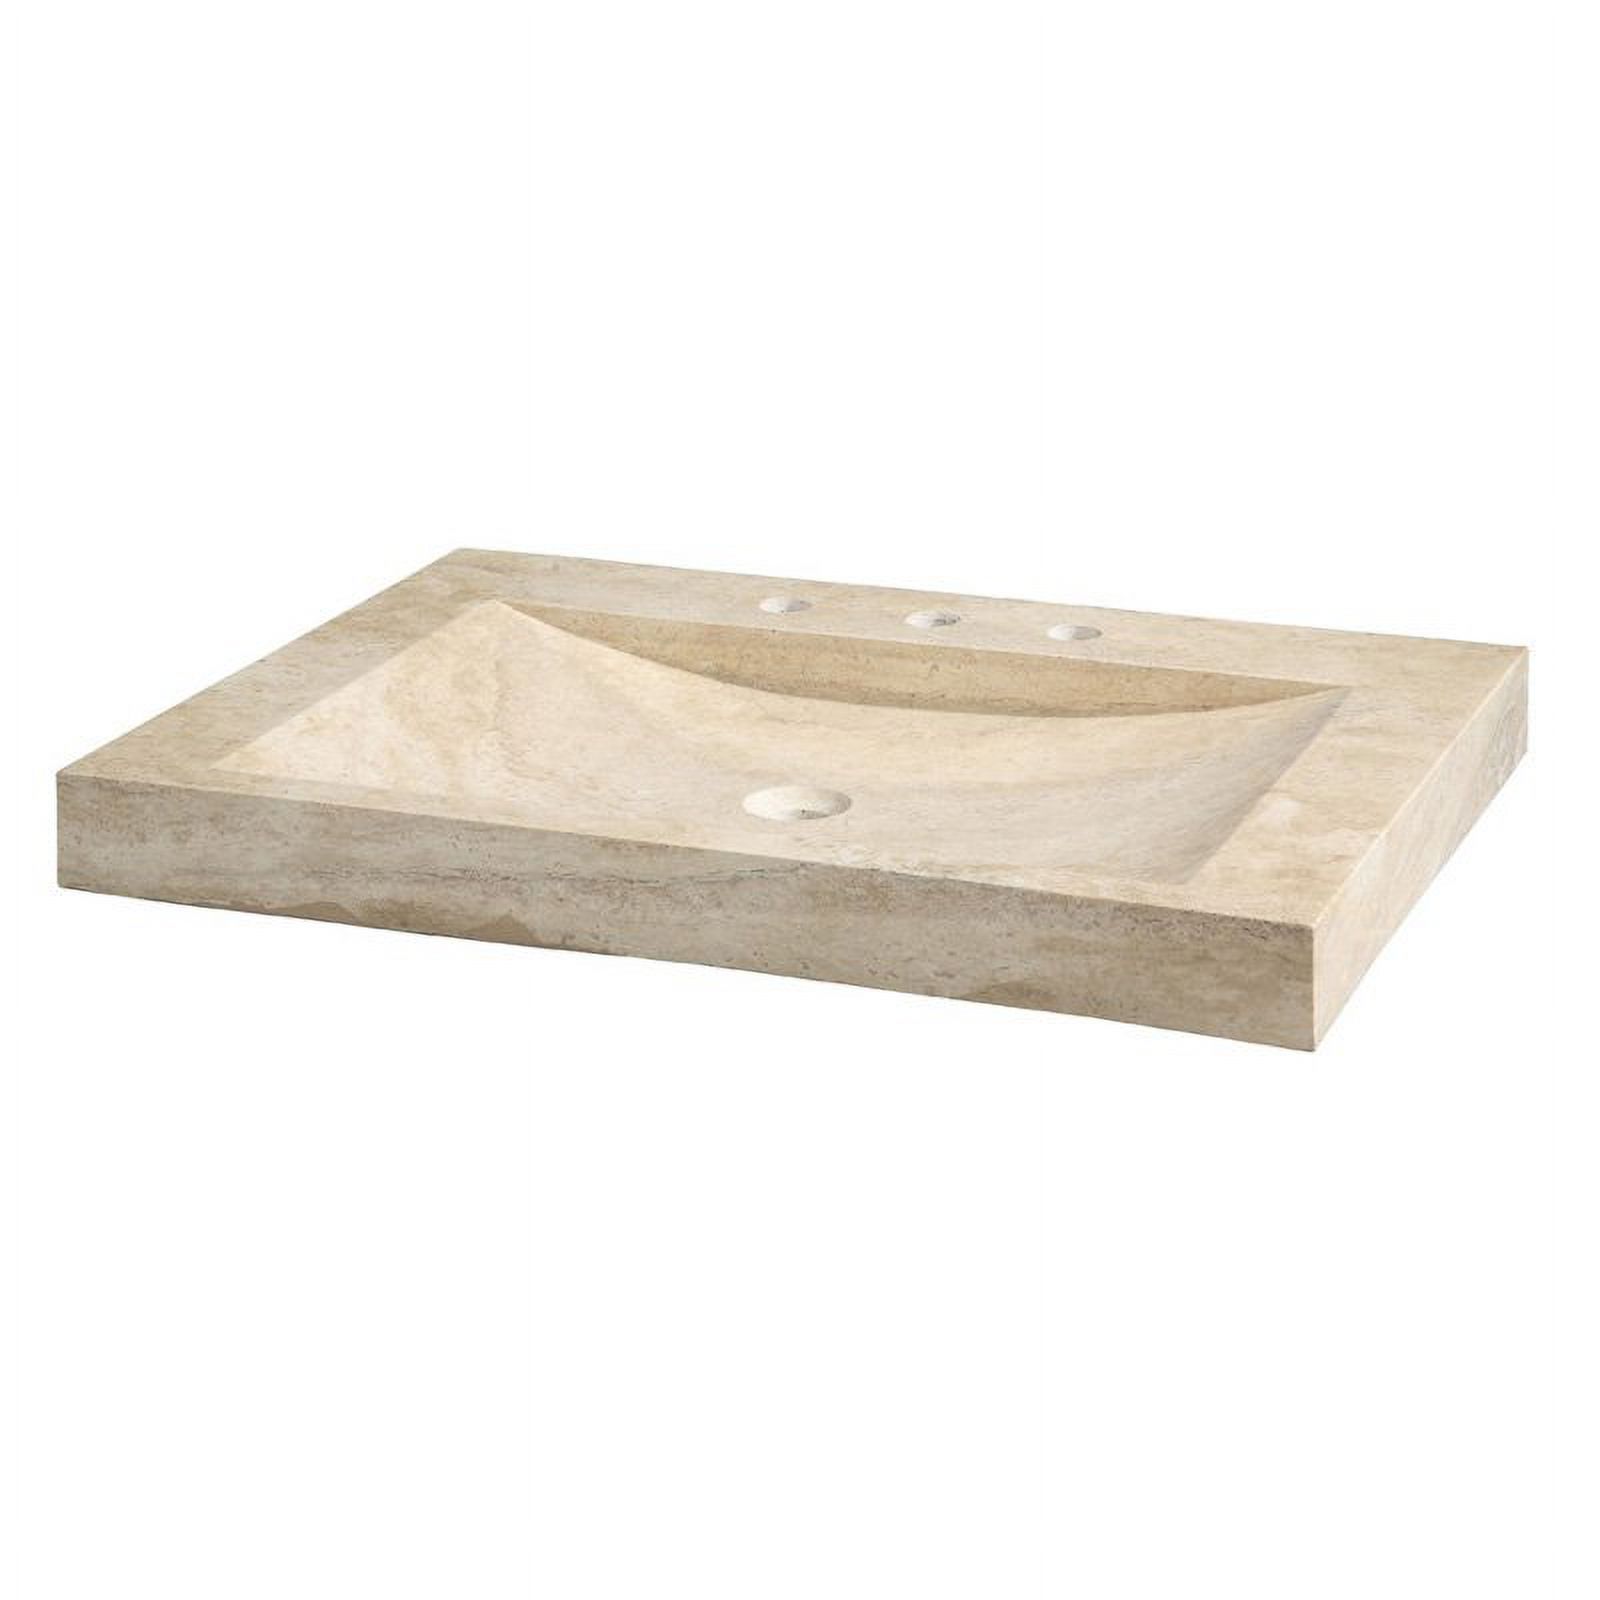 Xylem 30.125W x 21.625D in. Stone Integral Sink Vanity Top - image 1 of 2